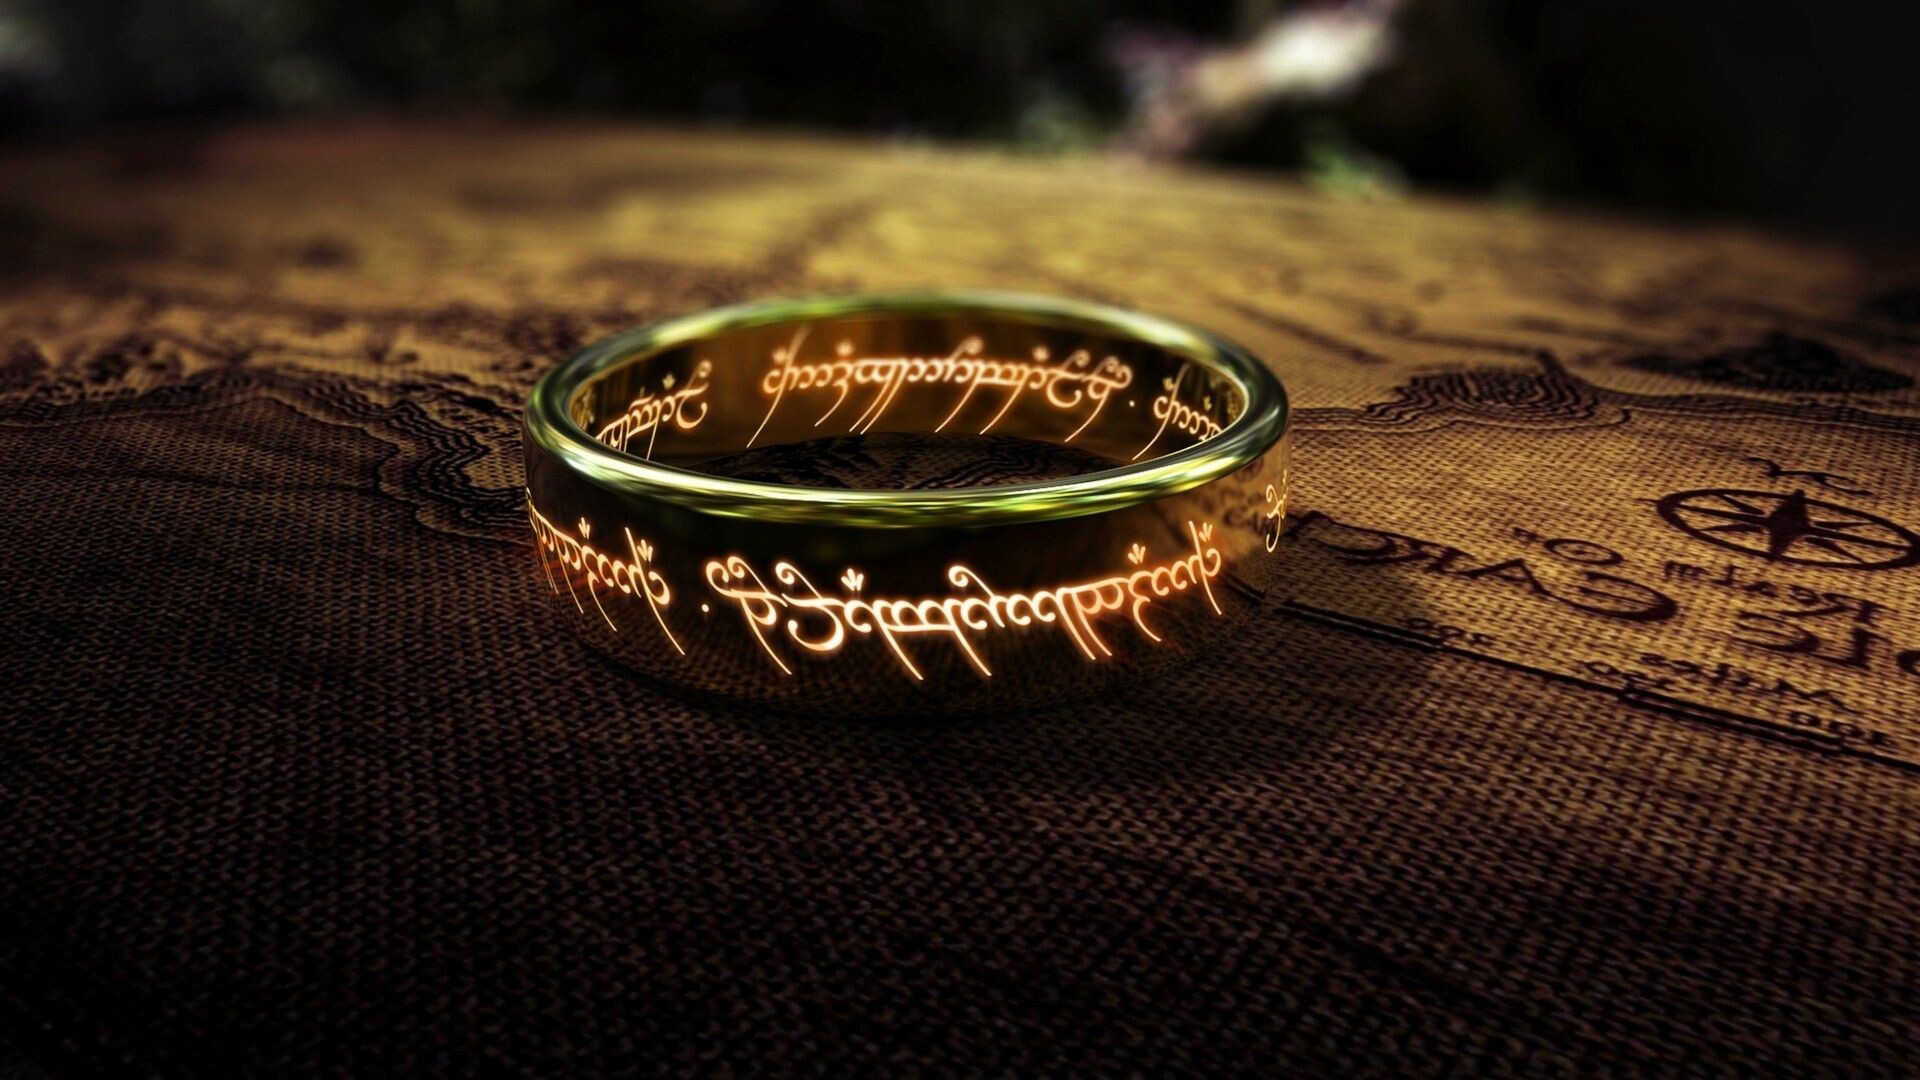 The Lord of the Rings, One Ring, Wallpapers, Tolkien, 1920x1080 Full HD Desktop